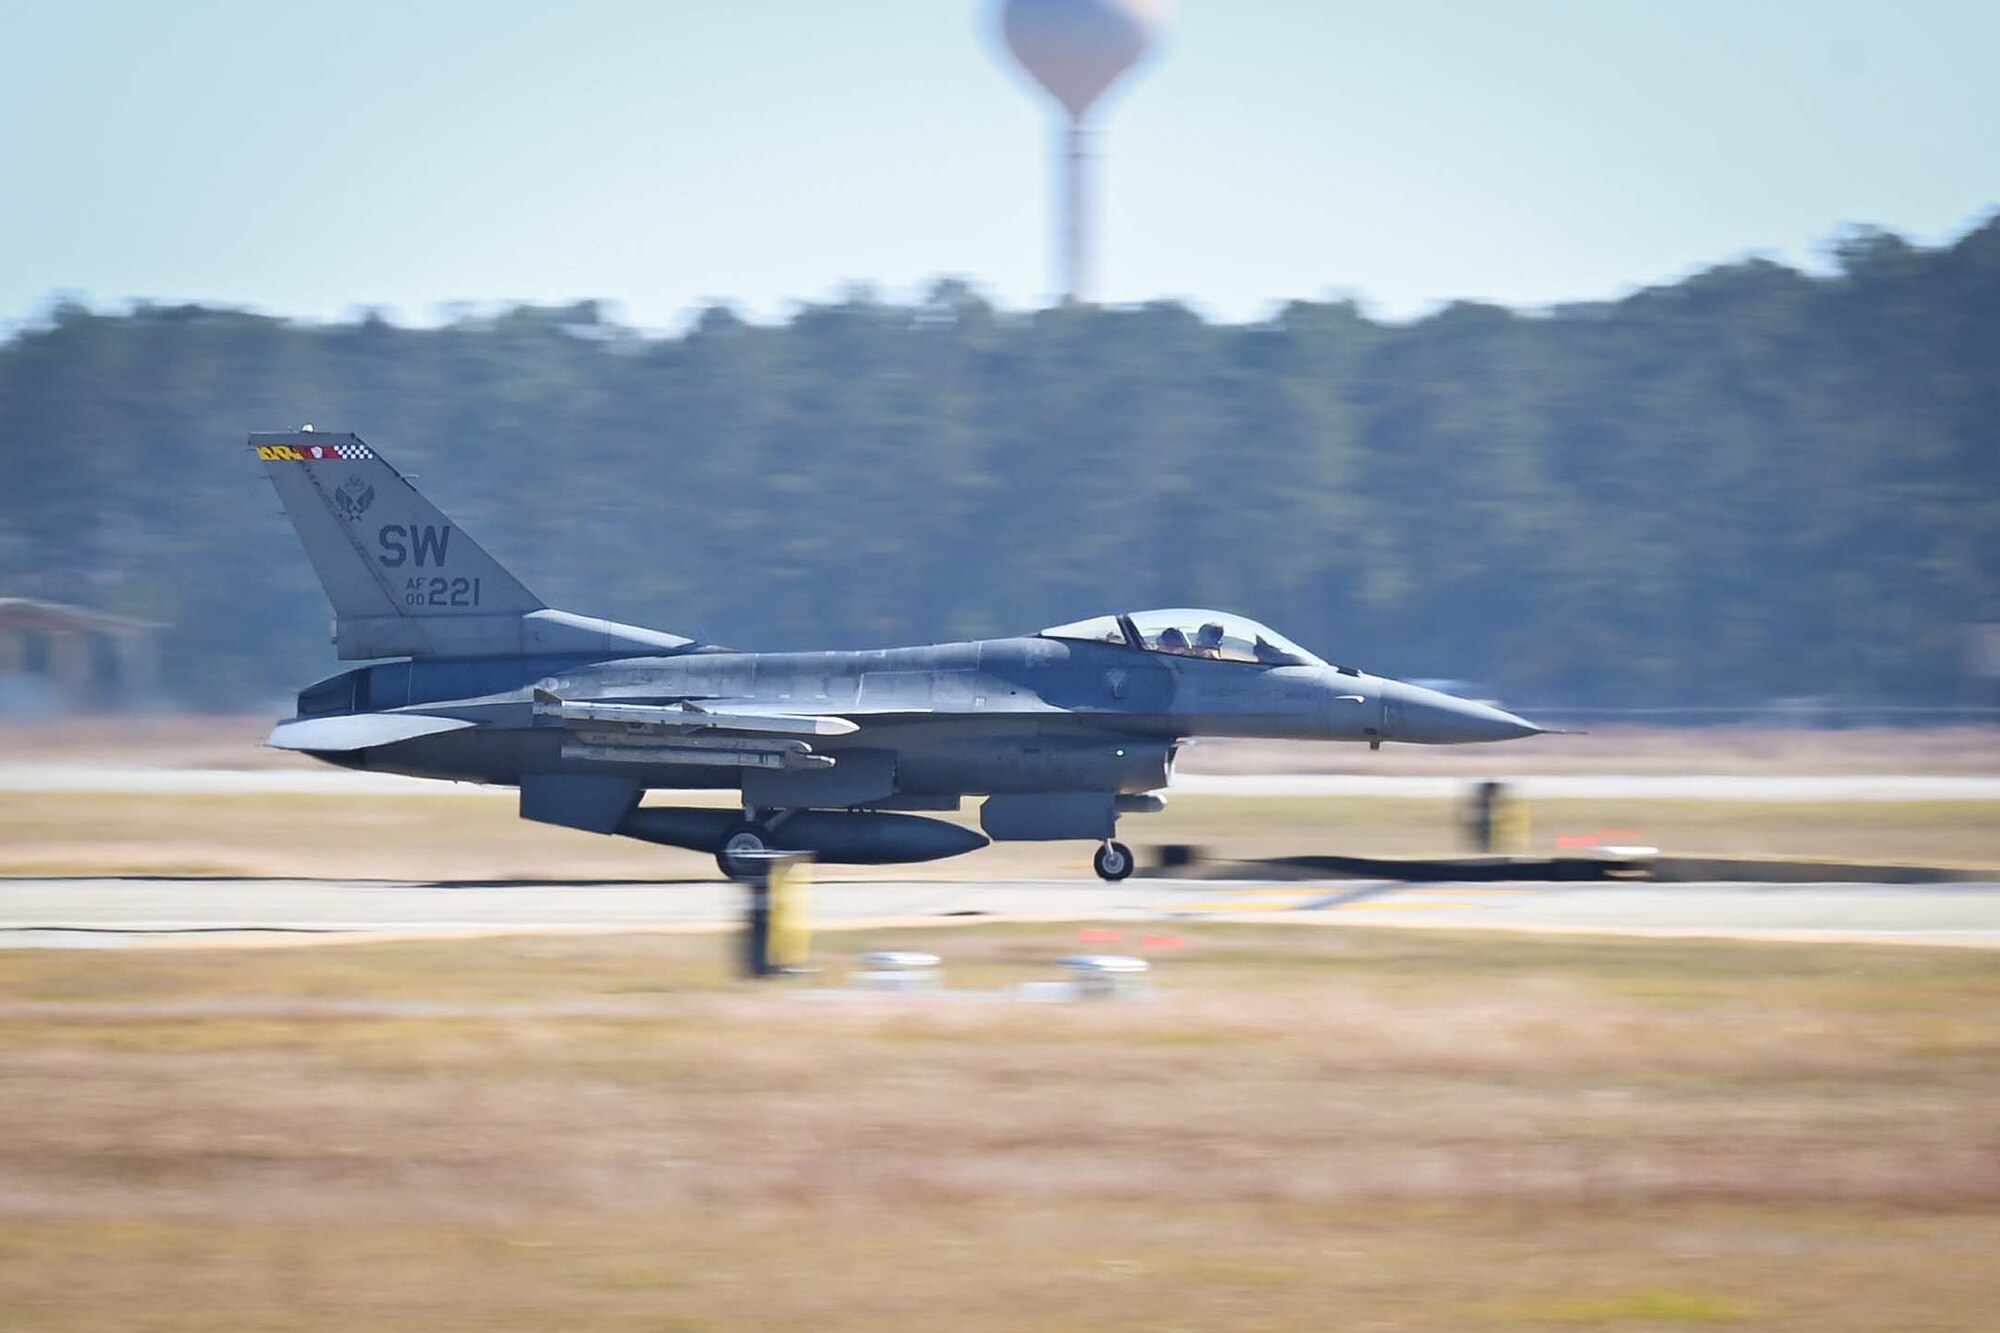 An F-16 takes off from the flightline.